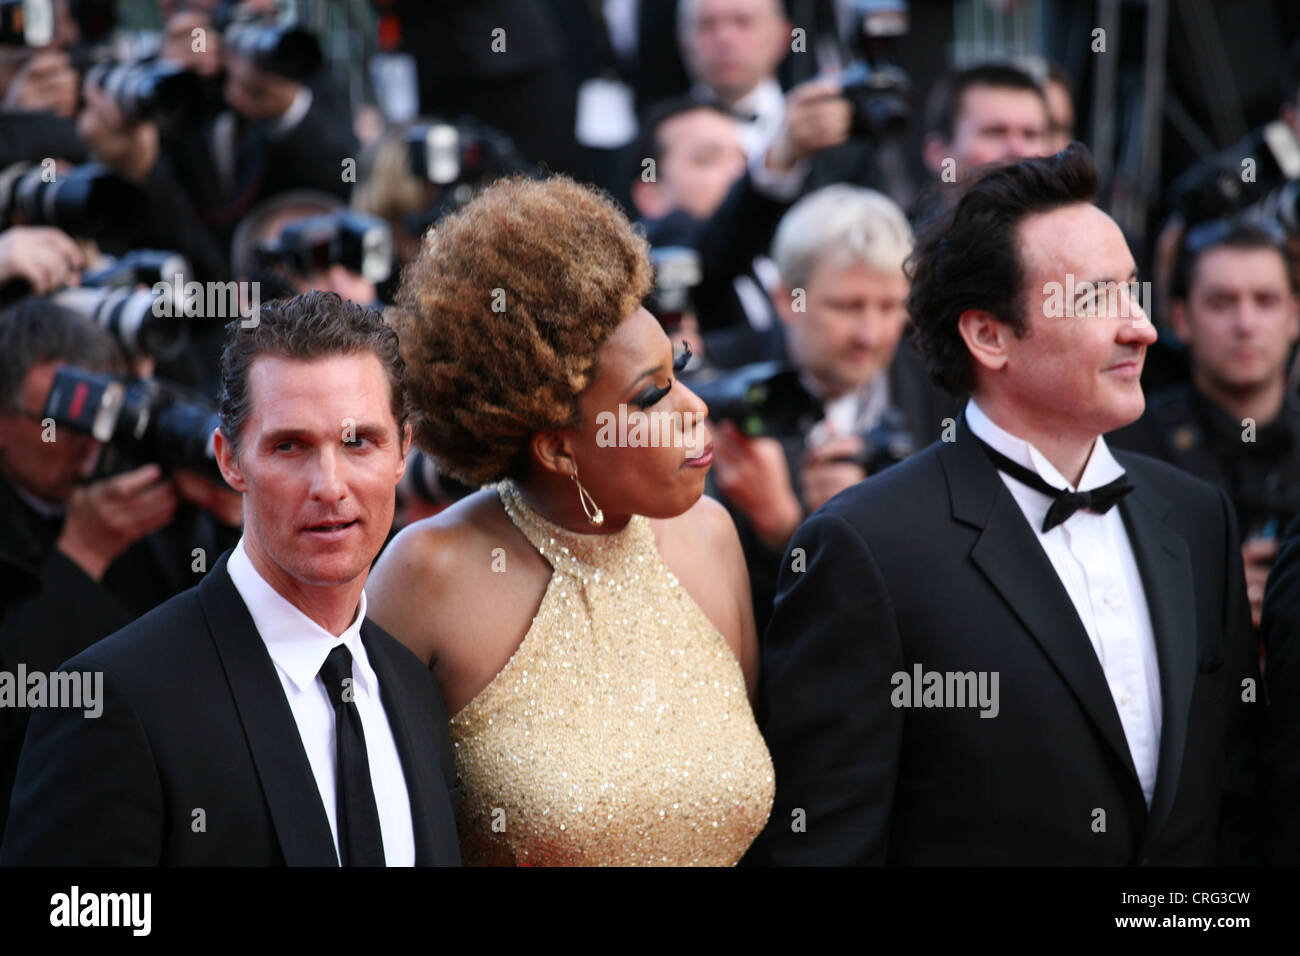 Matthew Mcconaughey, Macy Gray, John Cusack, at The Paperboy gala screening red carpet at the 65th Cannes Film Festival France. Stock Photo